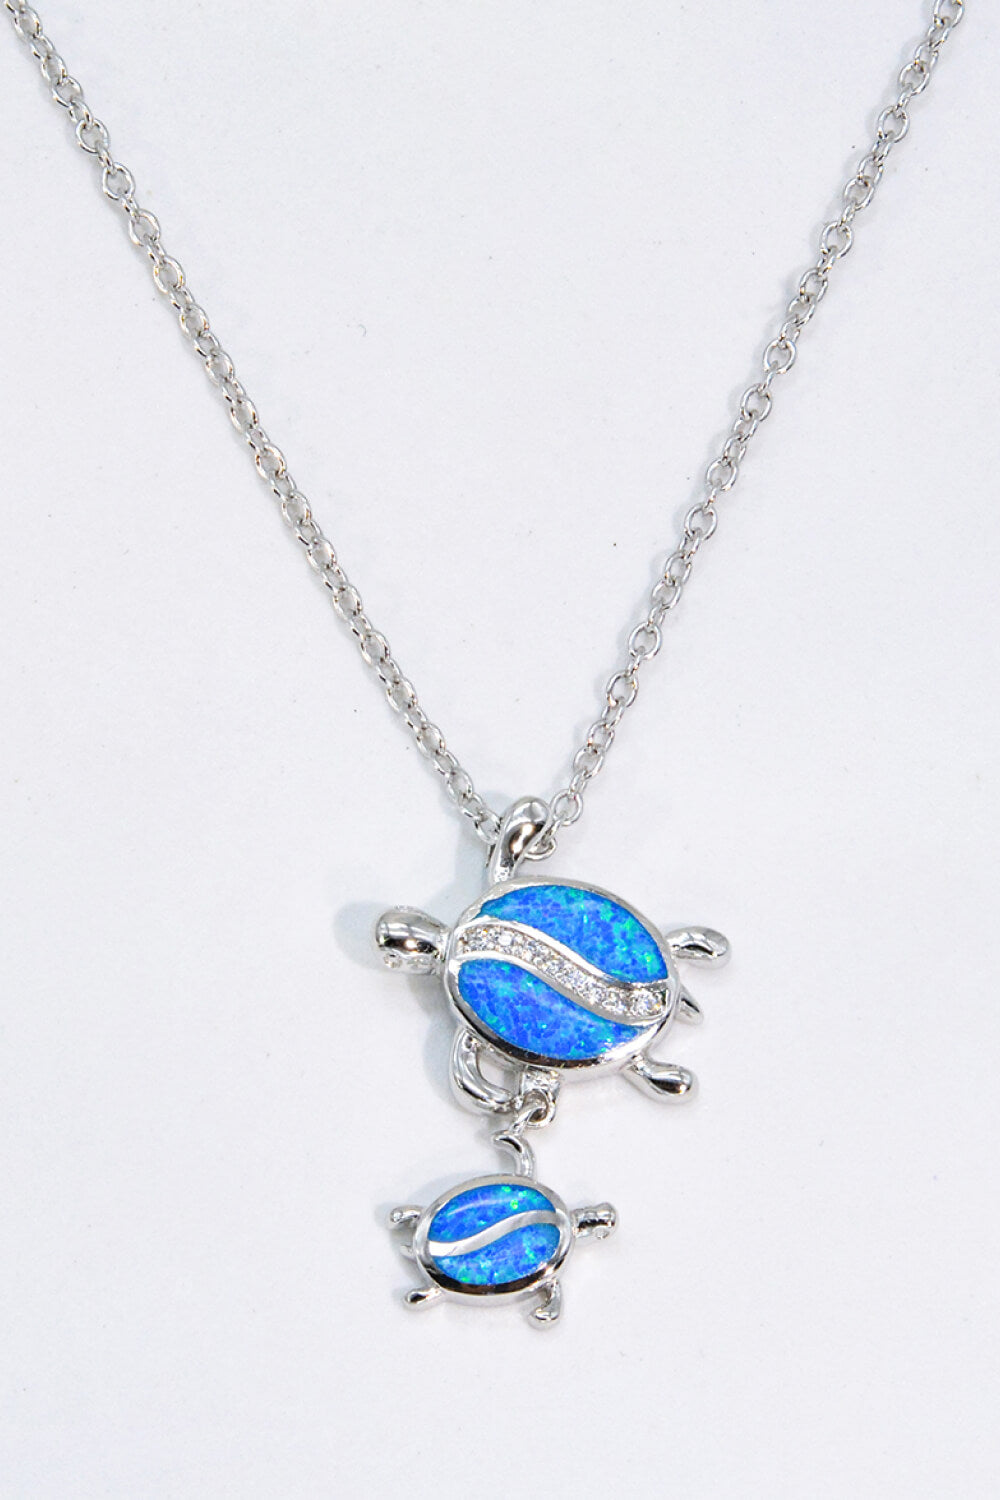 Opal Turtle Pendant Necklace - Tophatter Shopping Deals - Electronics, Jewelry, Auction, App, Bidding, Gadgets, Fashion